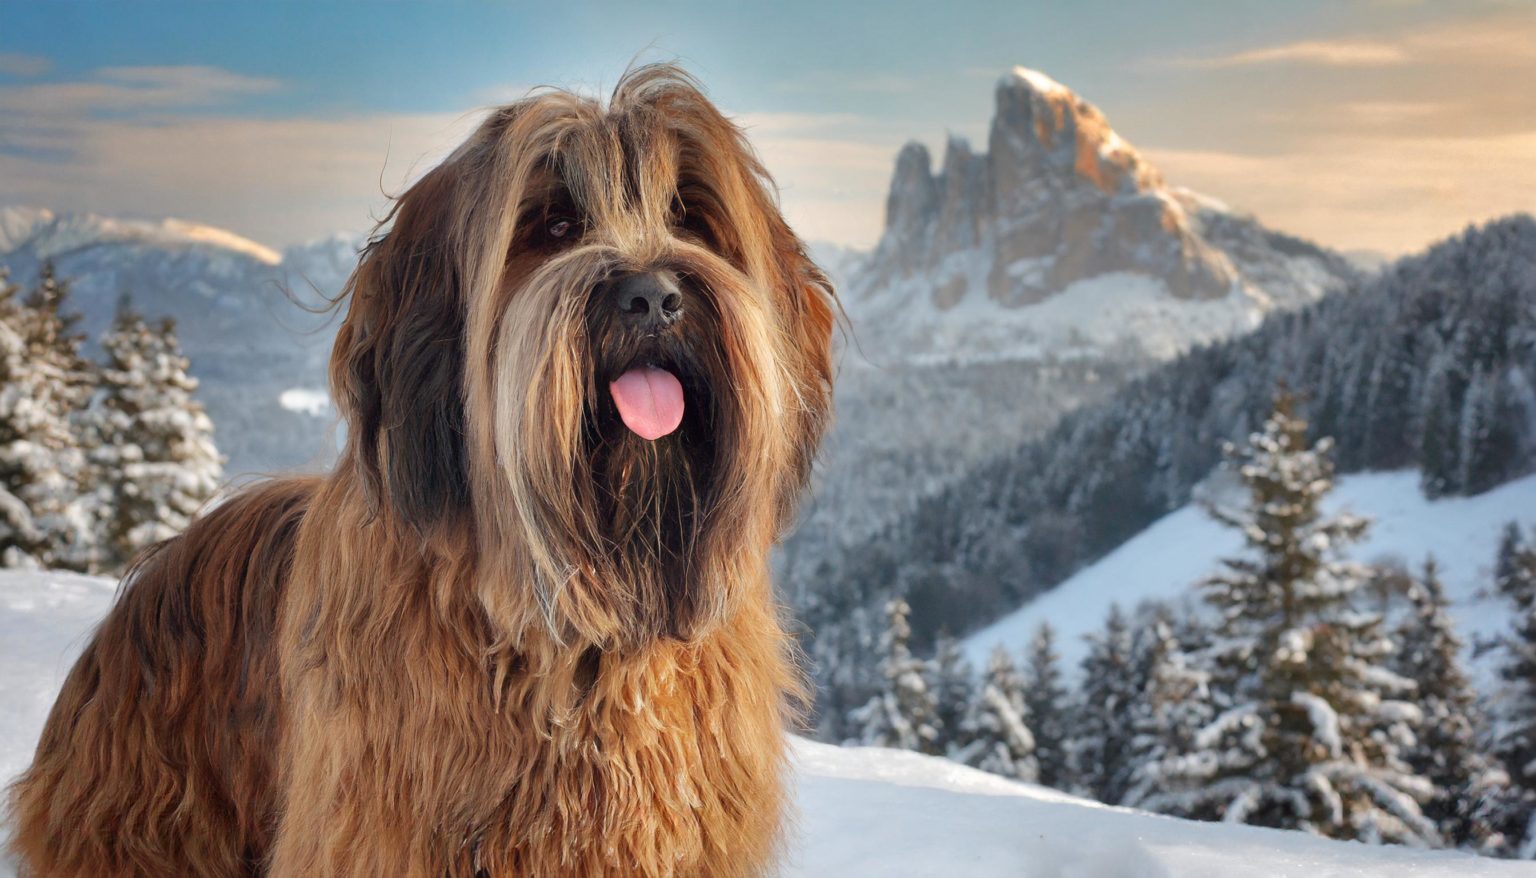 The Briard originated in, and is named for, the Brie historic region of north-central France, where it was traditionally used both for herding sheep and to defend them.